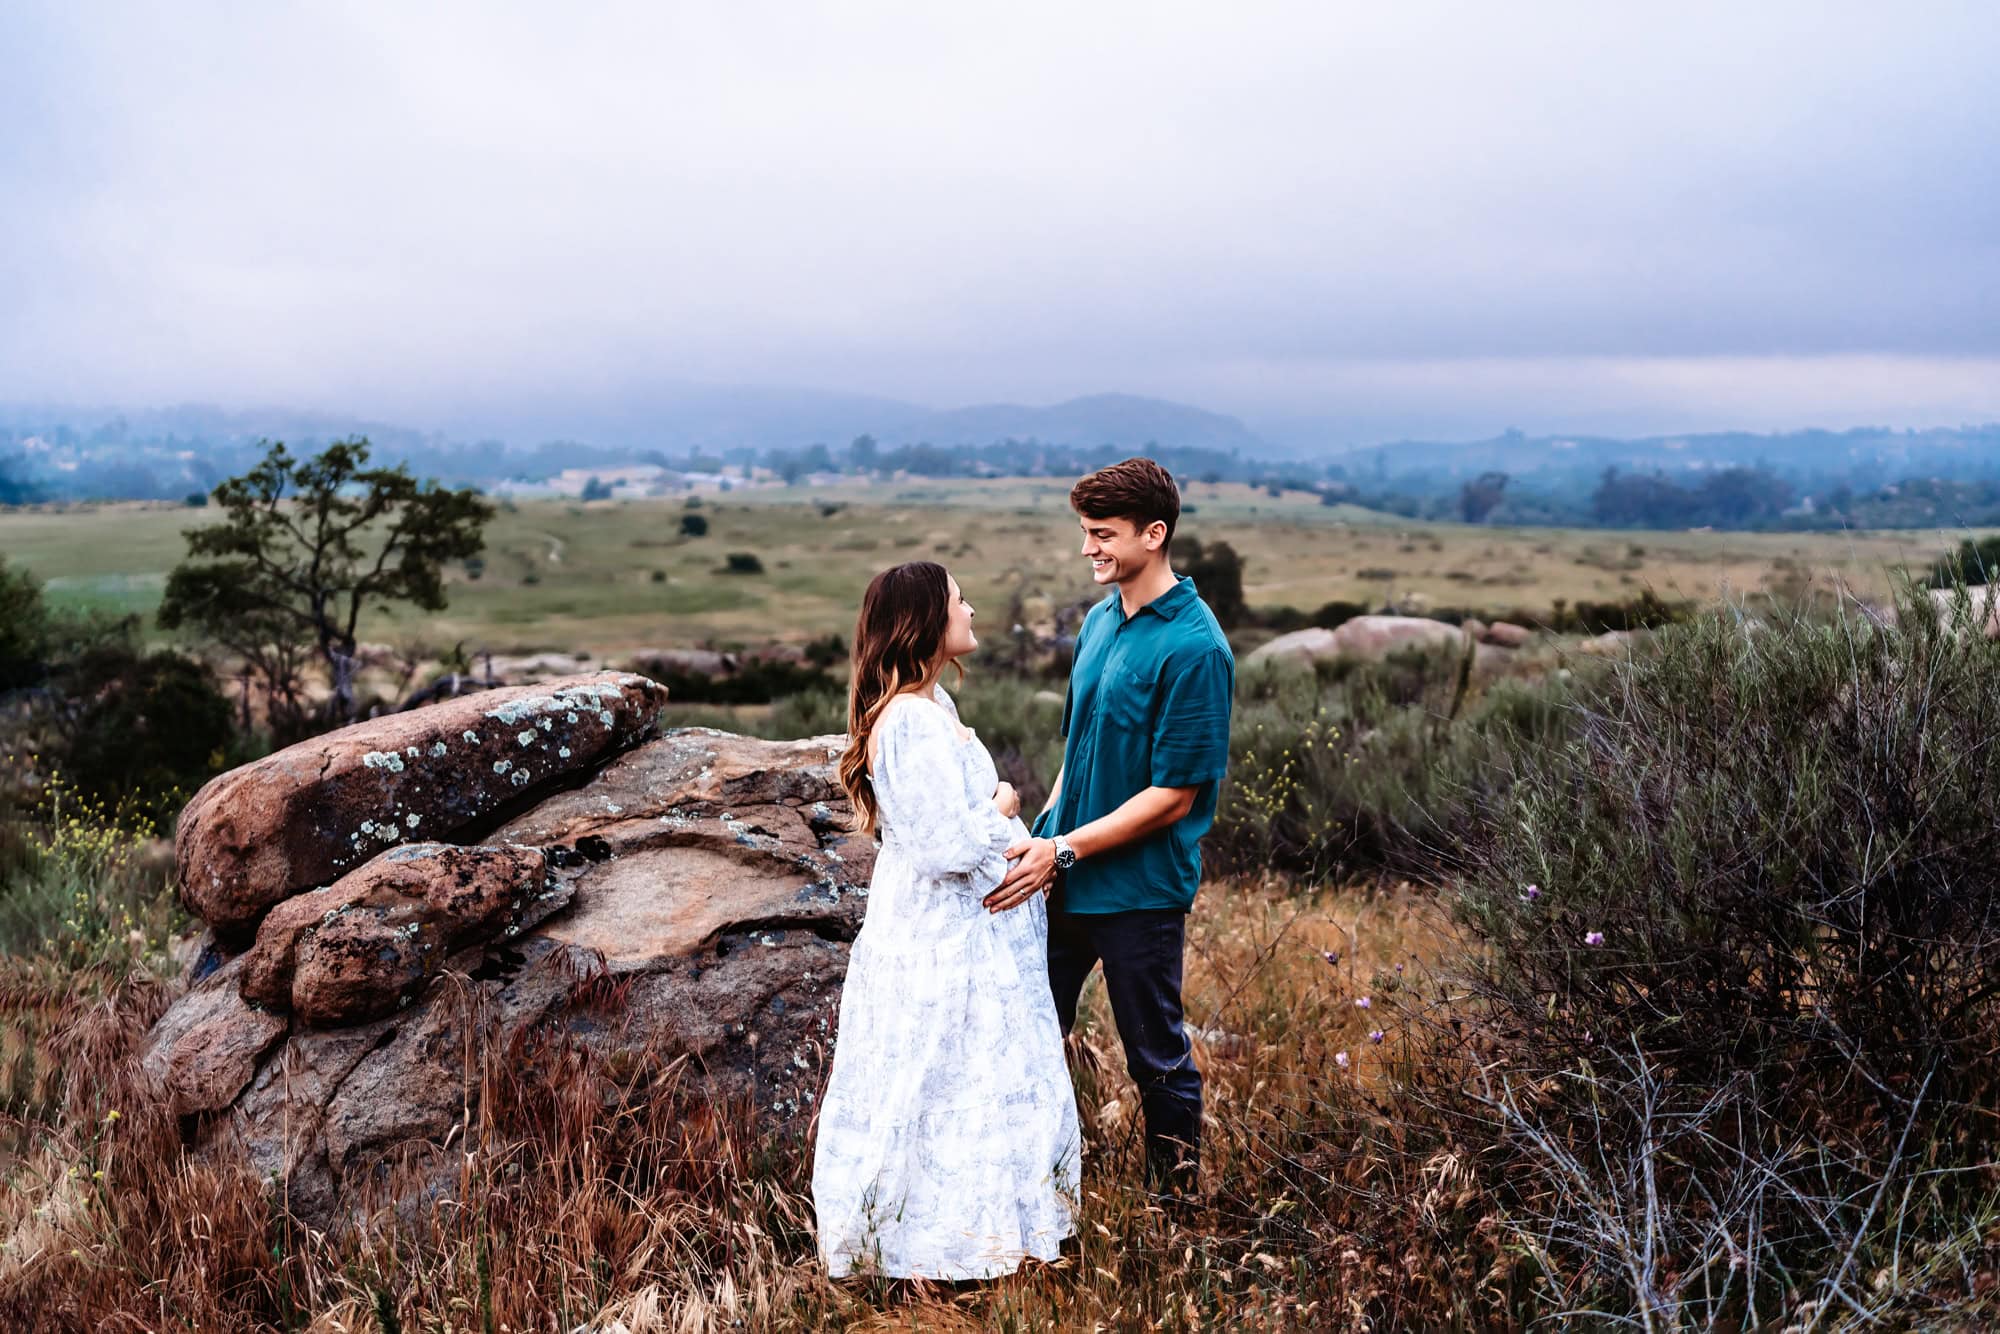 A pregnant woman and her husband hold hands and gaze at each other while standing on a field next to large boulders in San Diego, CA. 